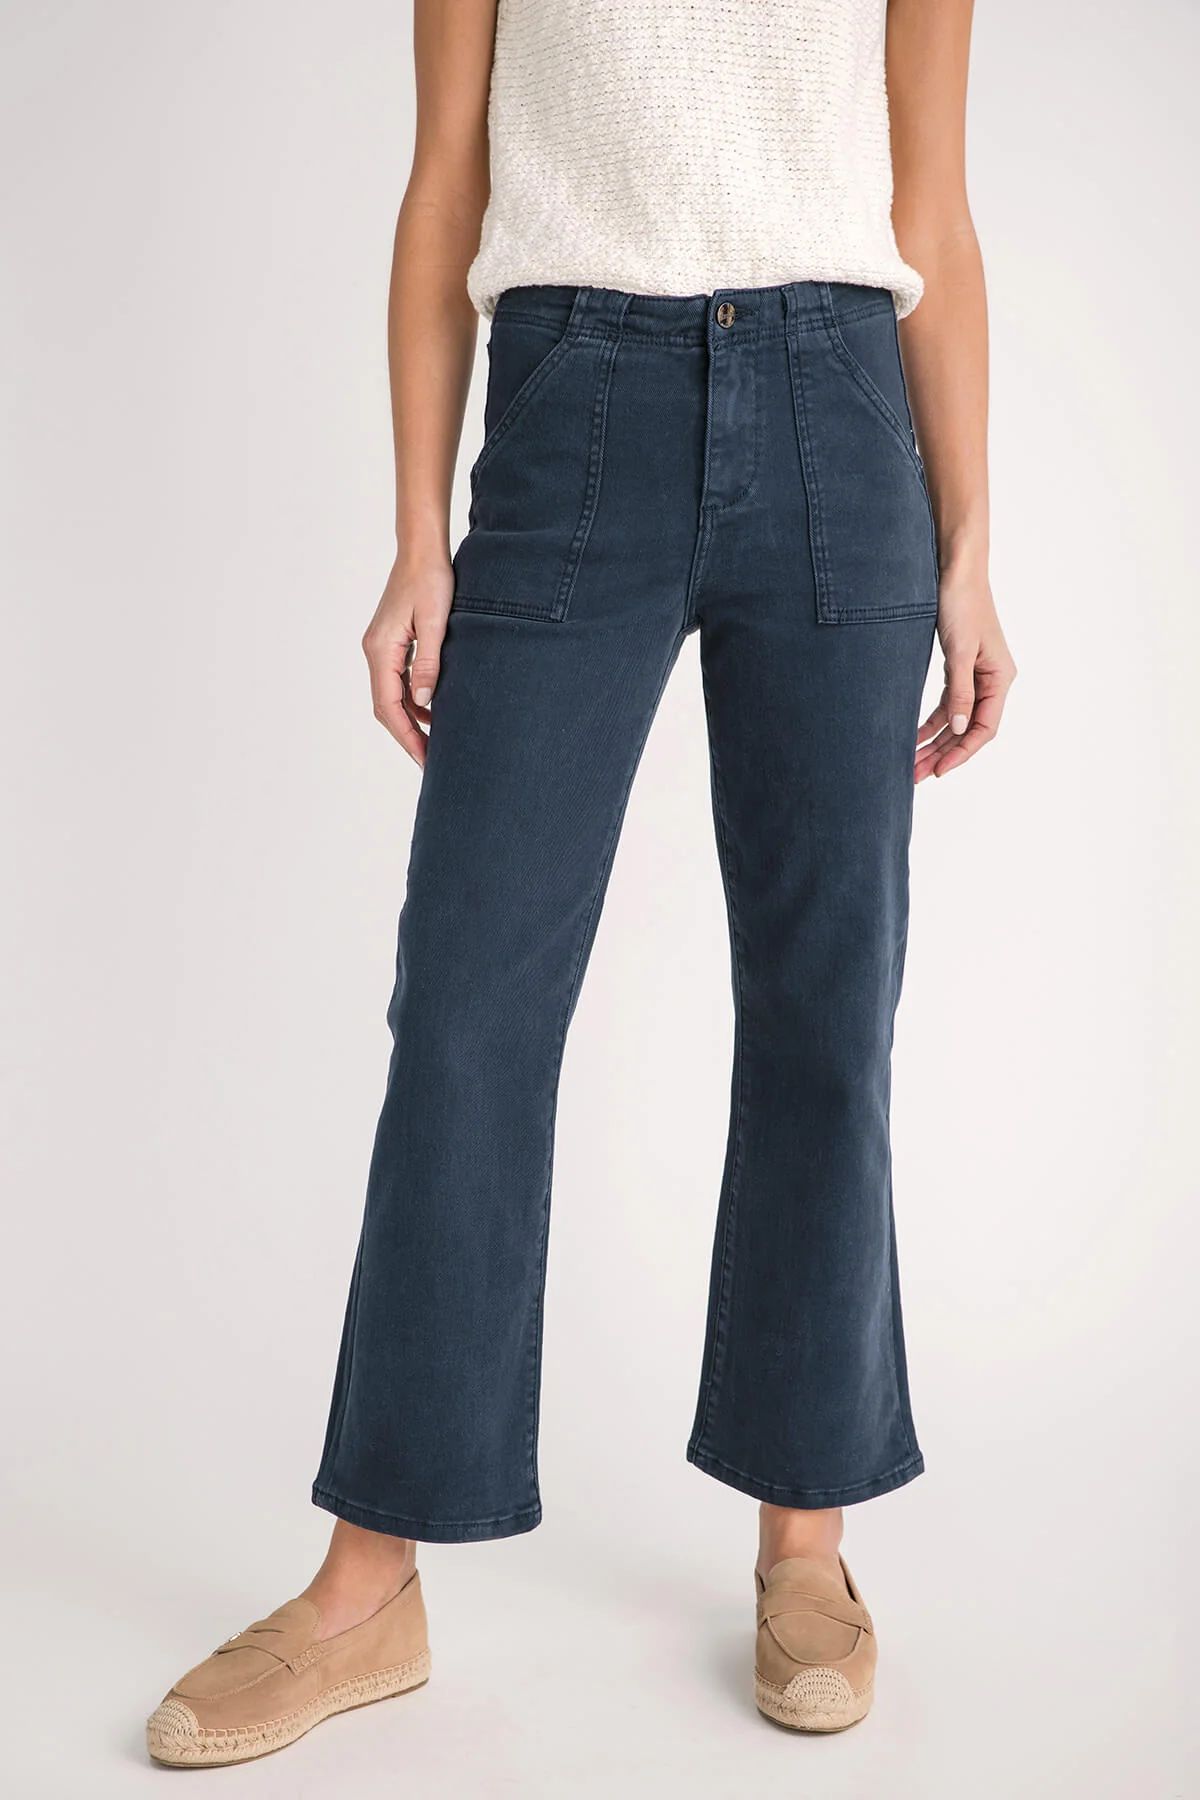 Risen Rosie Ankle Flare Jeans | Social Threads